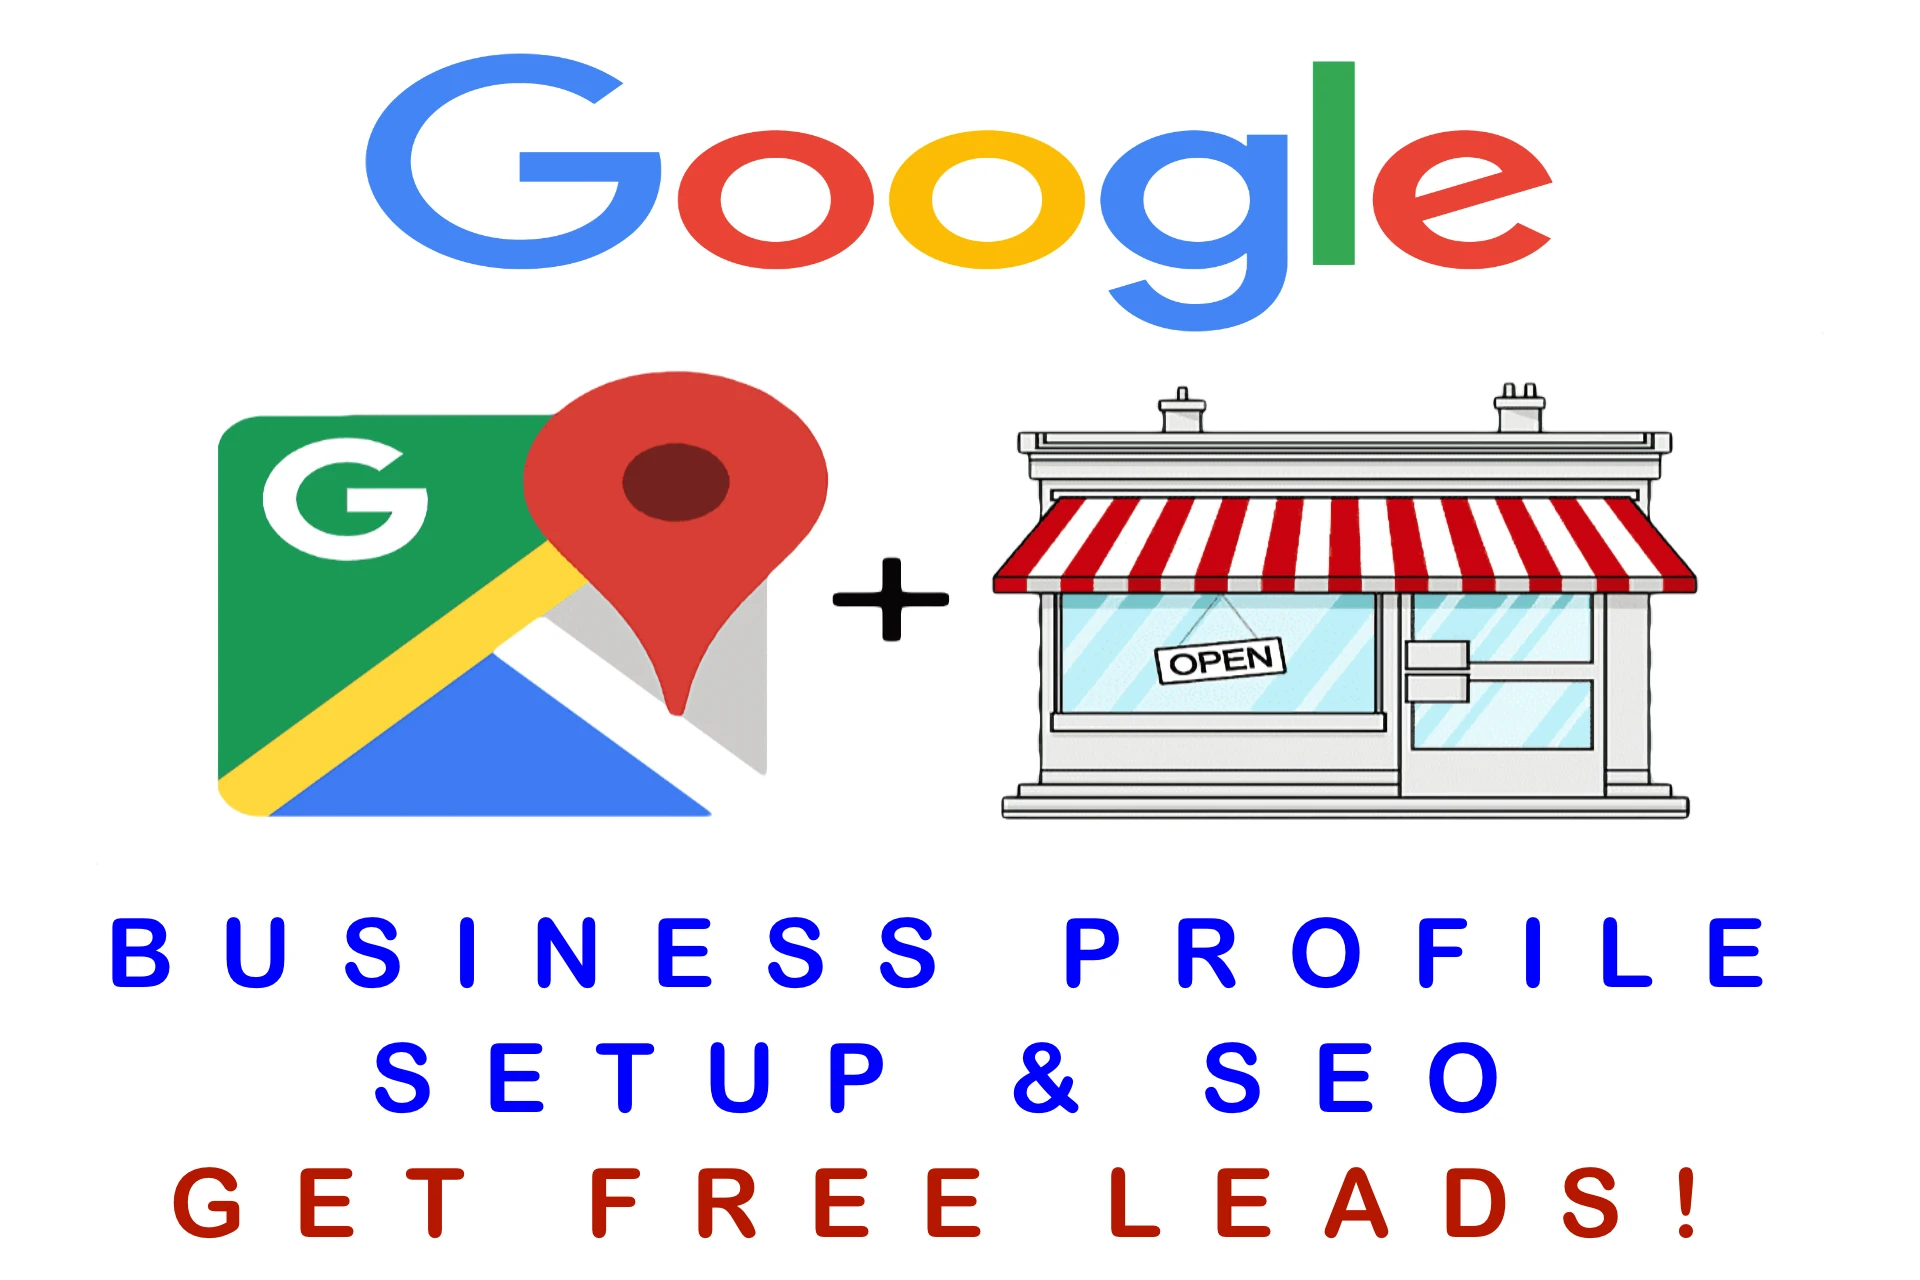 Google Business Profile Post Image Size Best Guide (2022) Image 03 